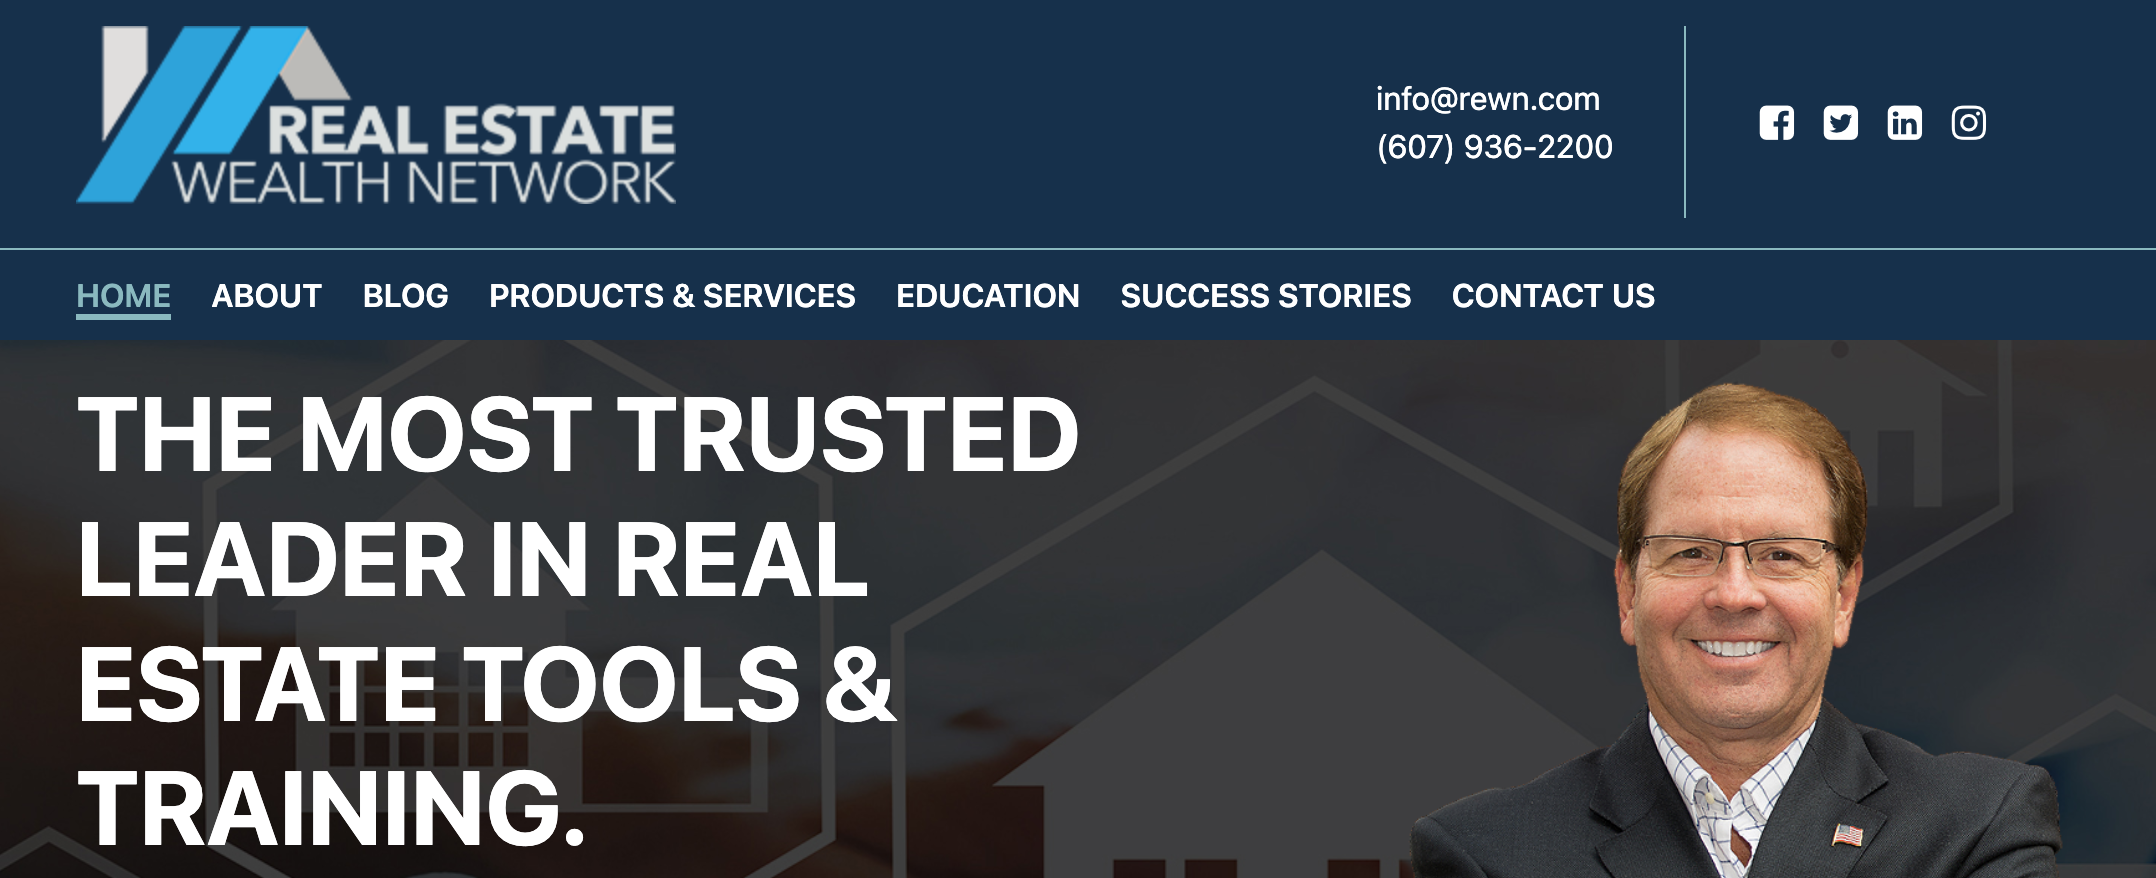 Real Estate Wealth Network review